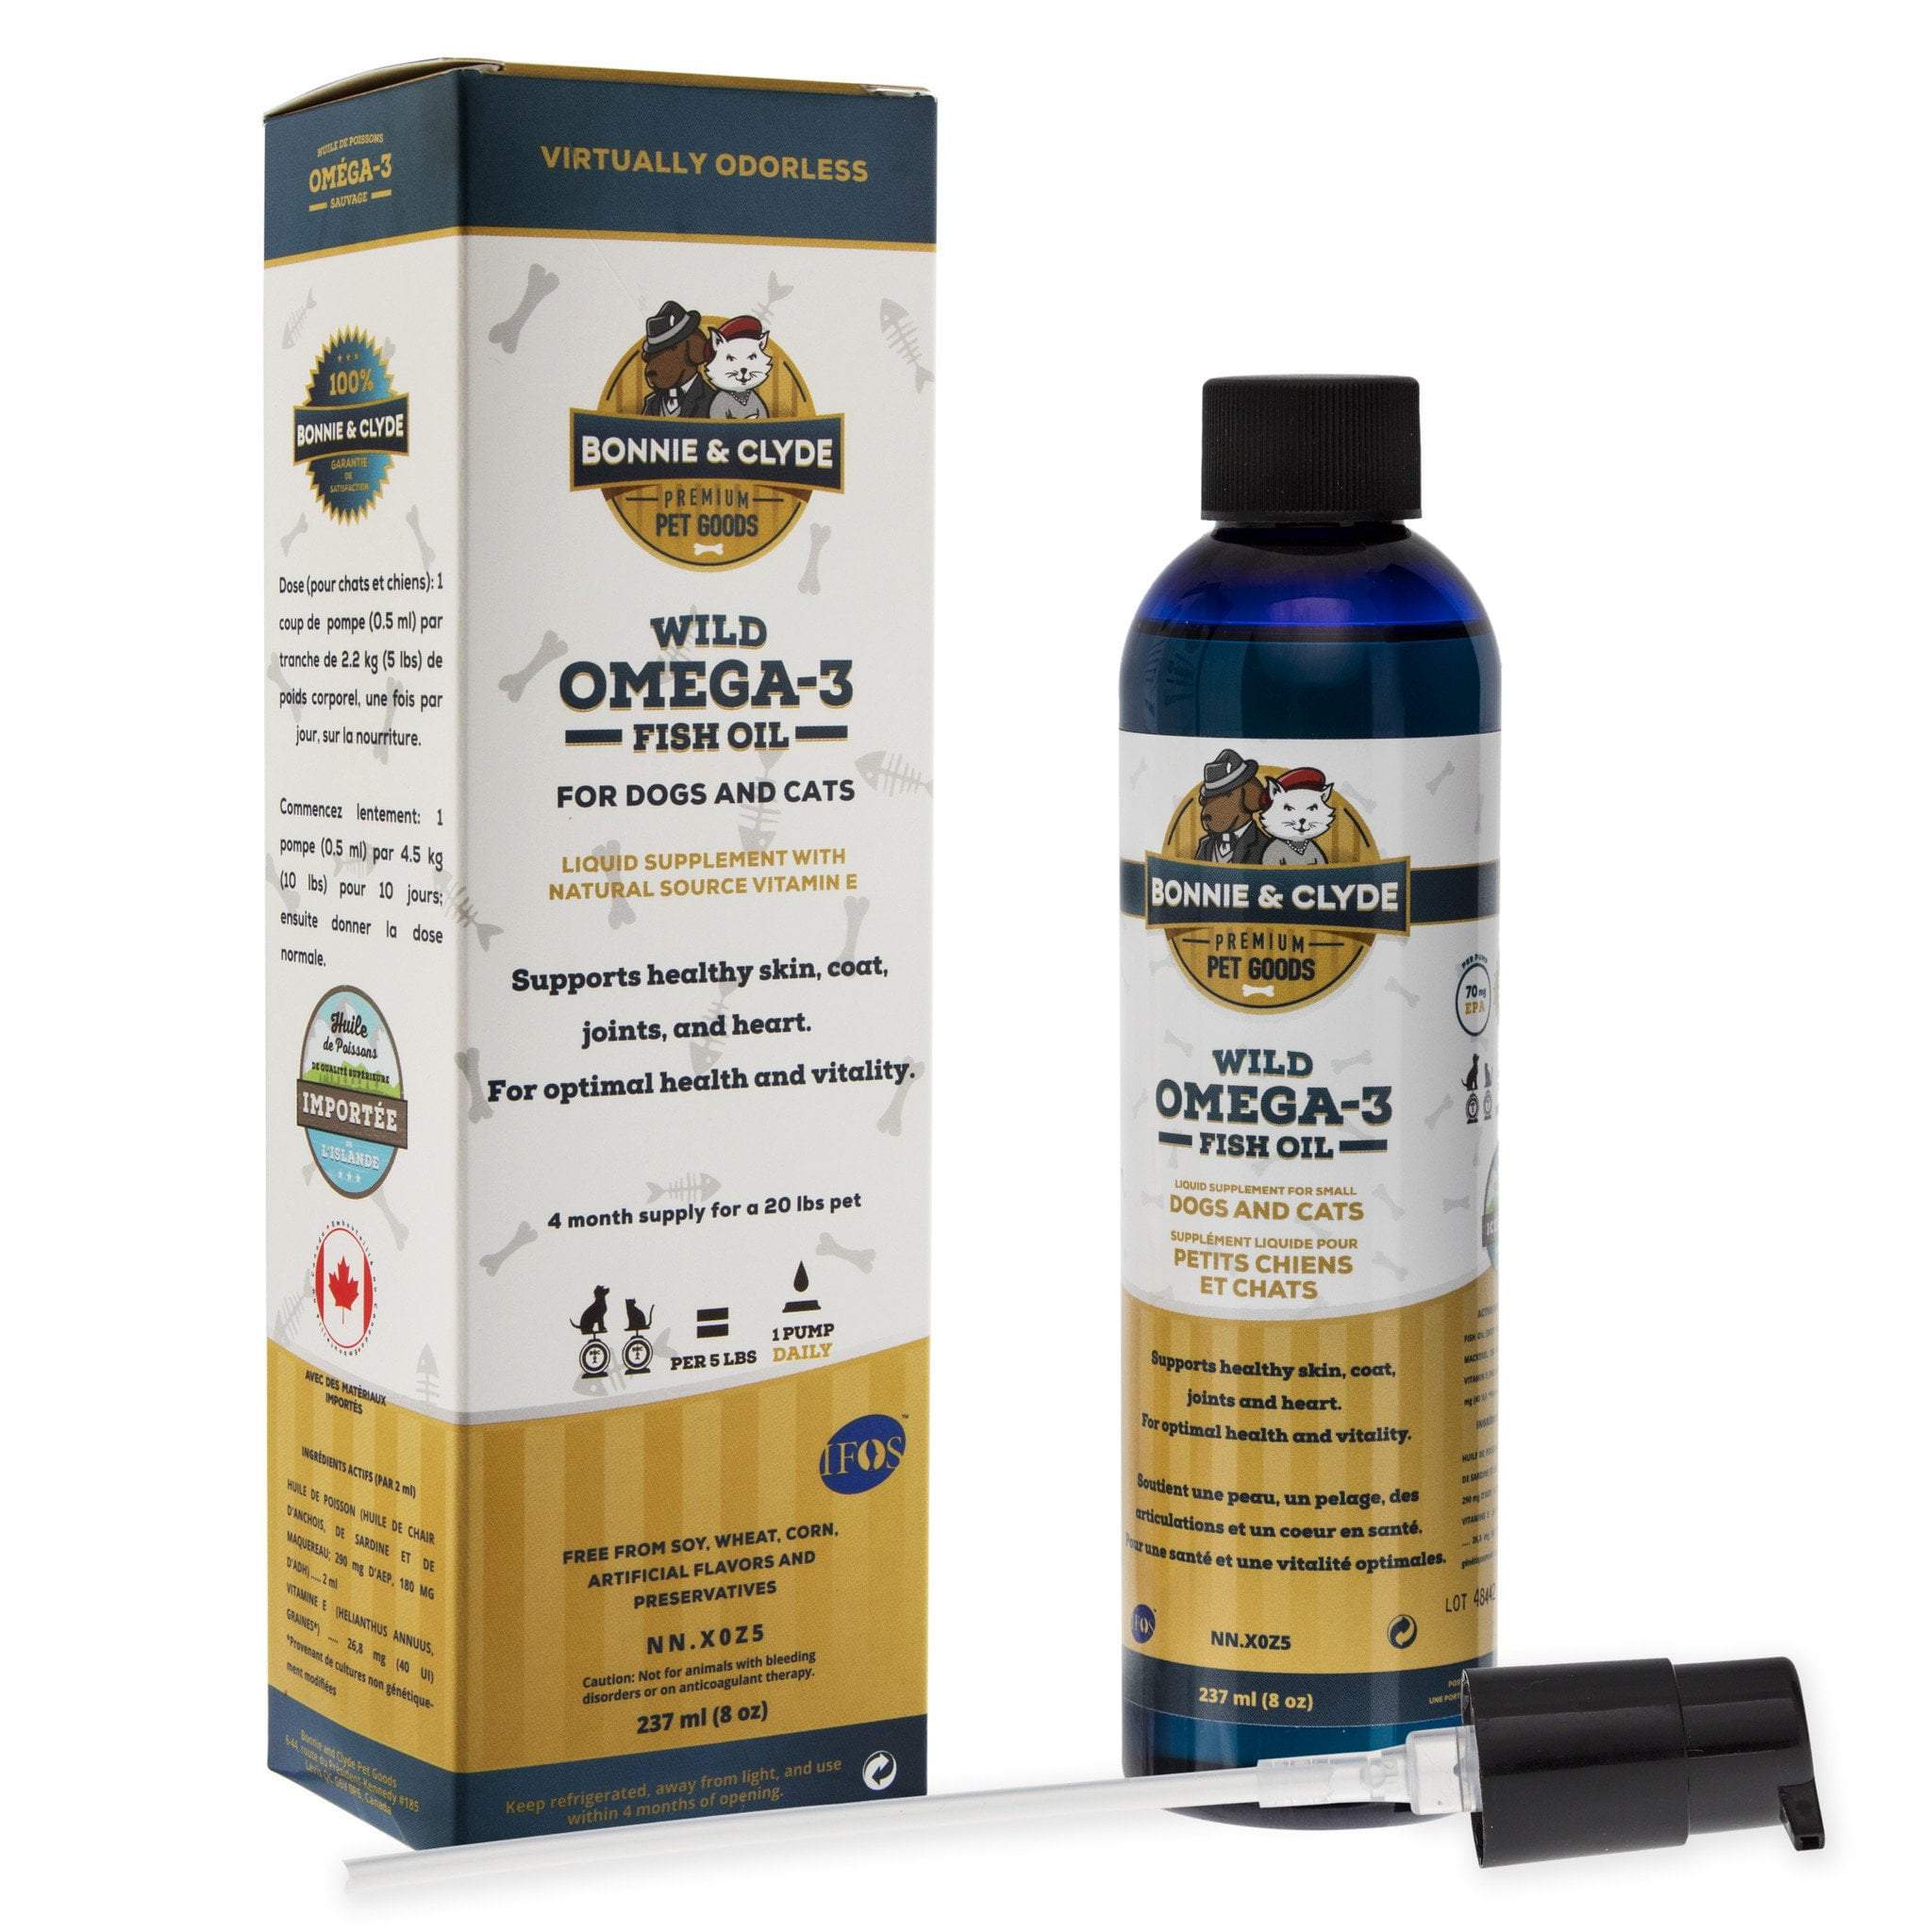 Bonnie and Clyde Wild Omega-3 Fish Oil Supplement for Dogs and Cats with Natural Vitamin E